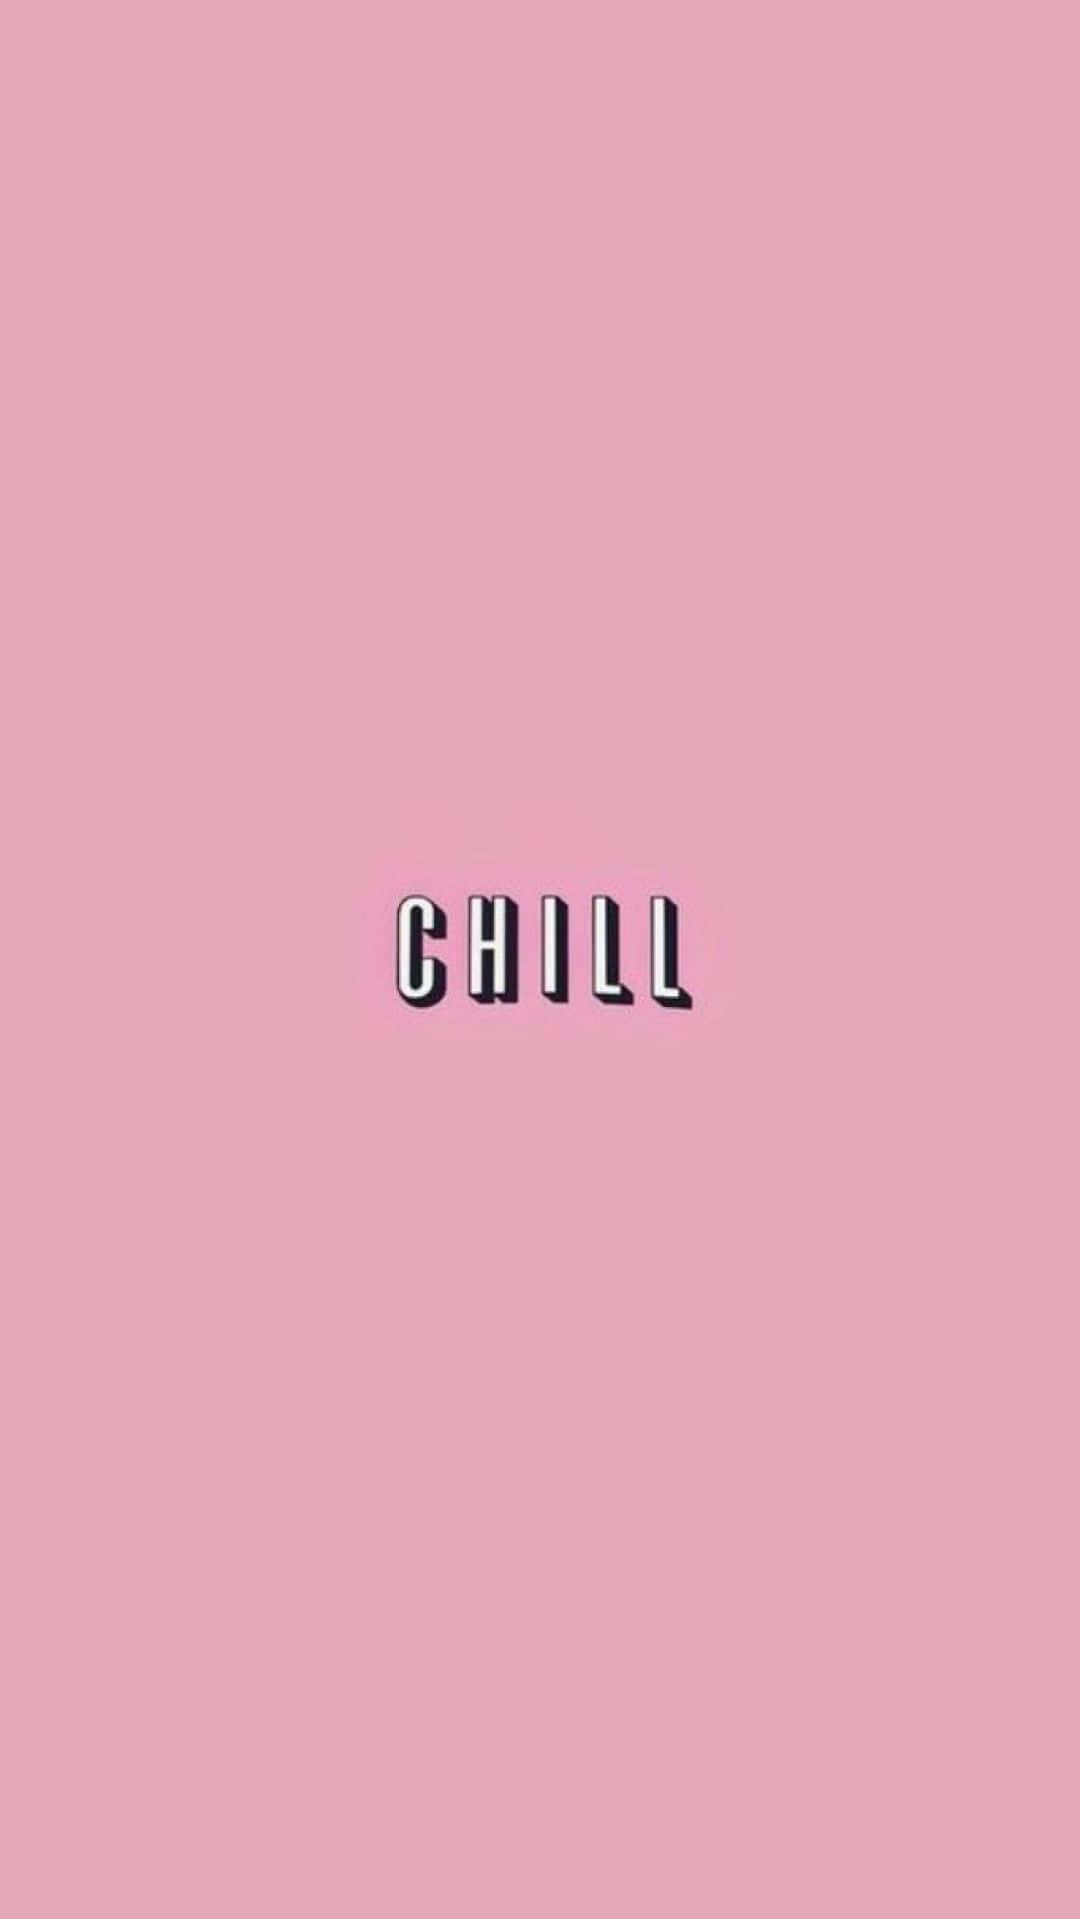 Stay cool and relaxed with a chill attitude Wallpaper